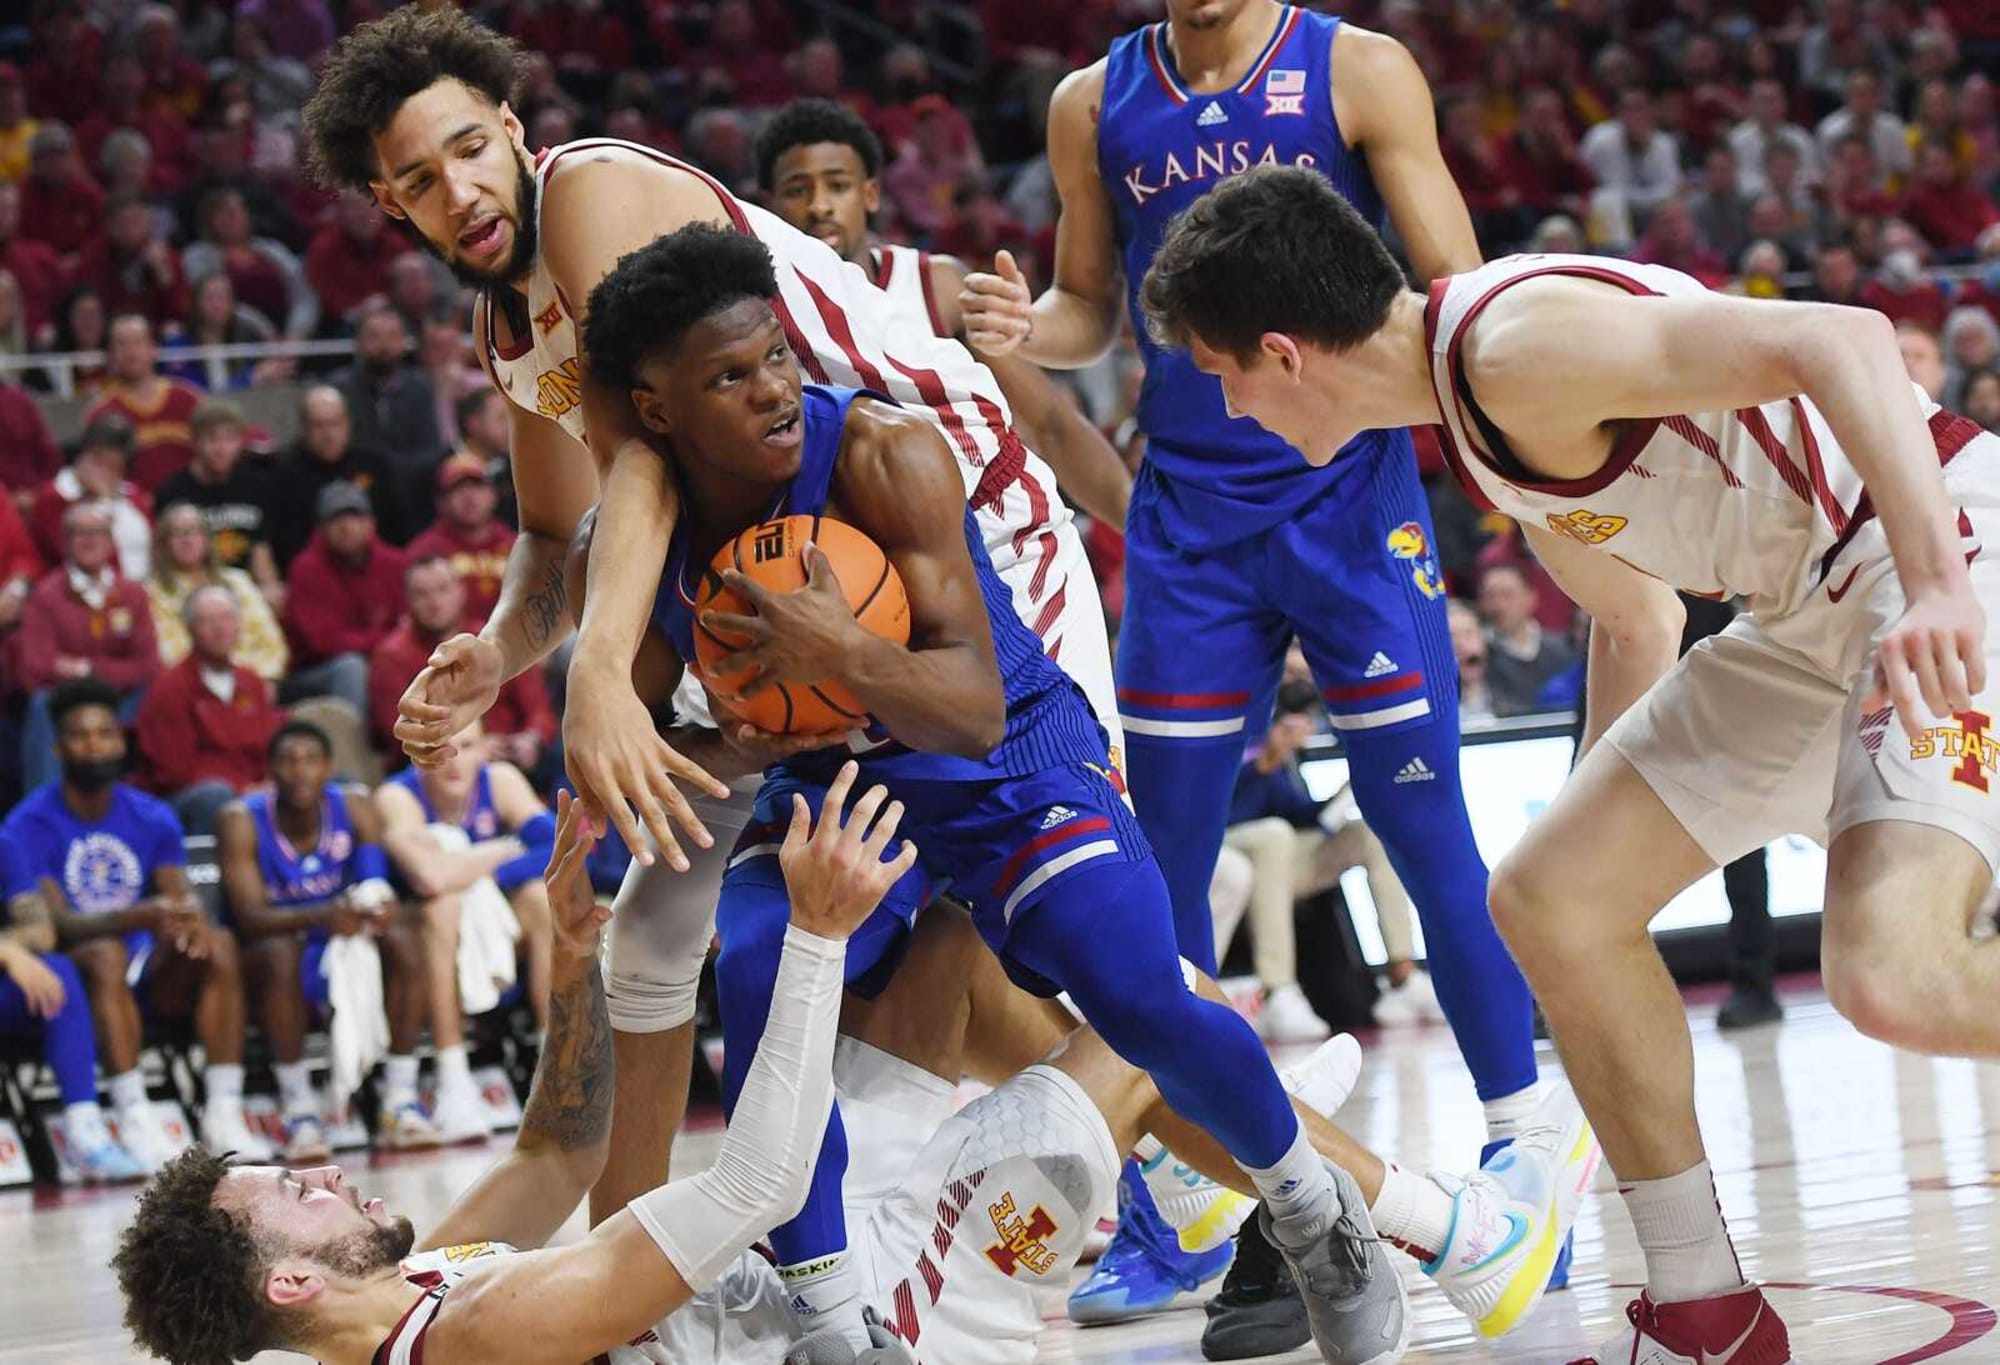 Ochai Agbaji out for Kansas against Iowa State due to COVID-19 health and  safety protocols, Sports